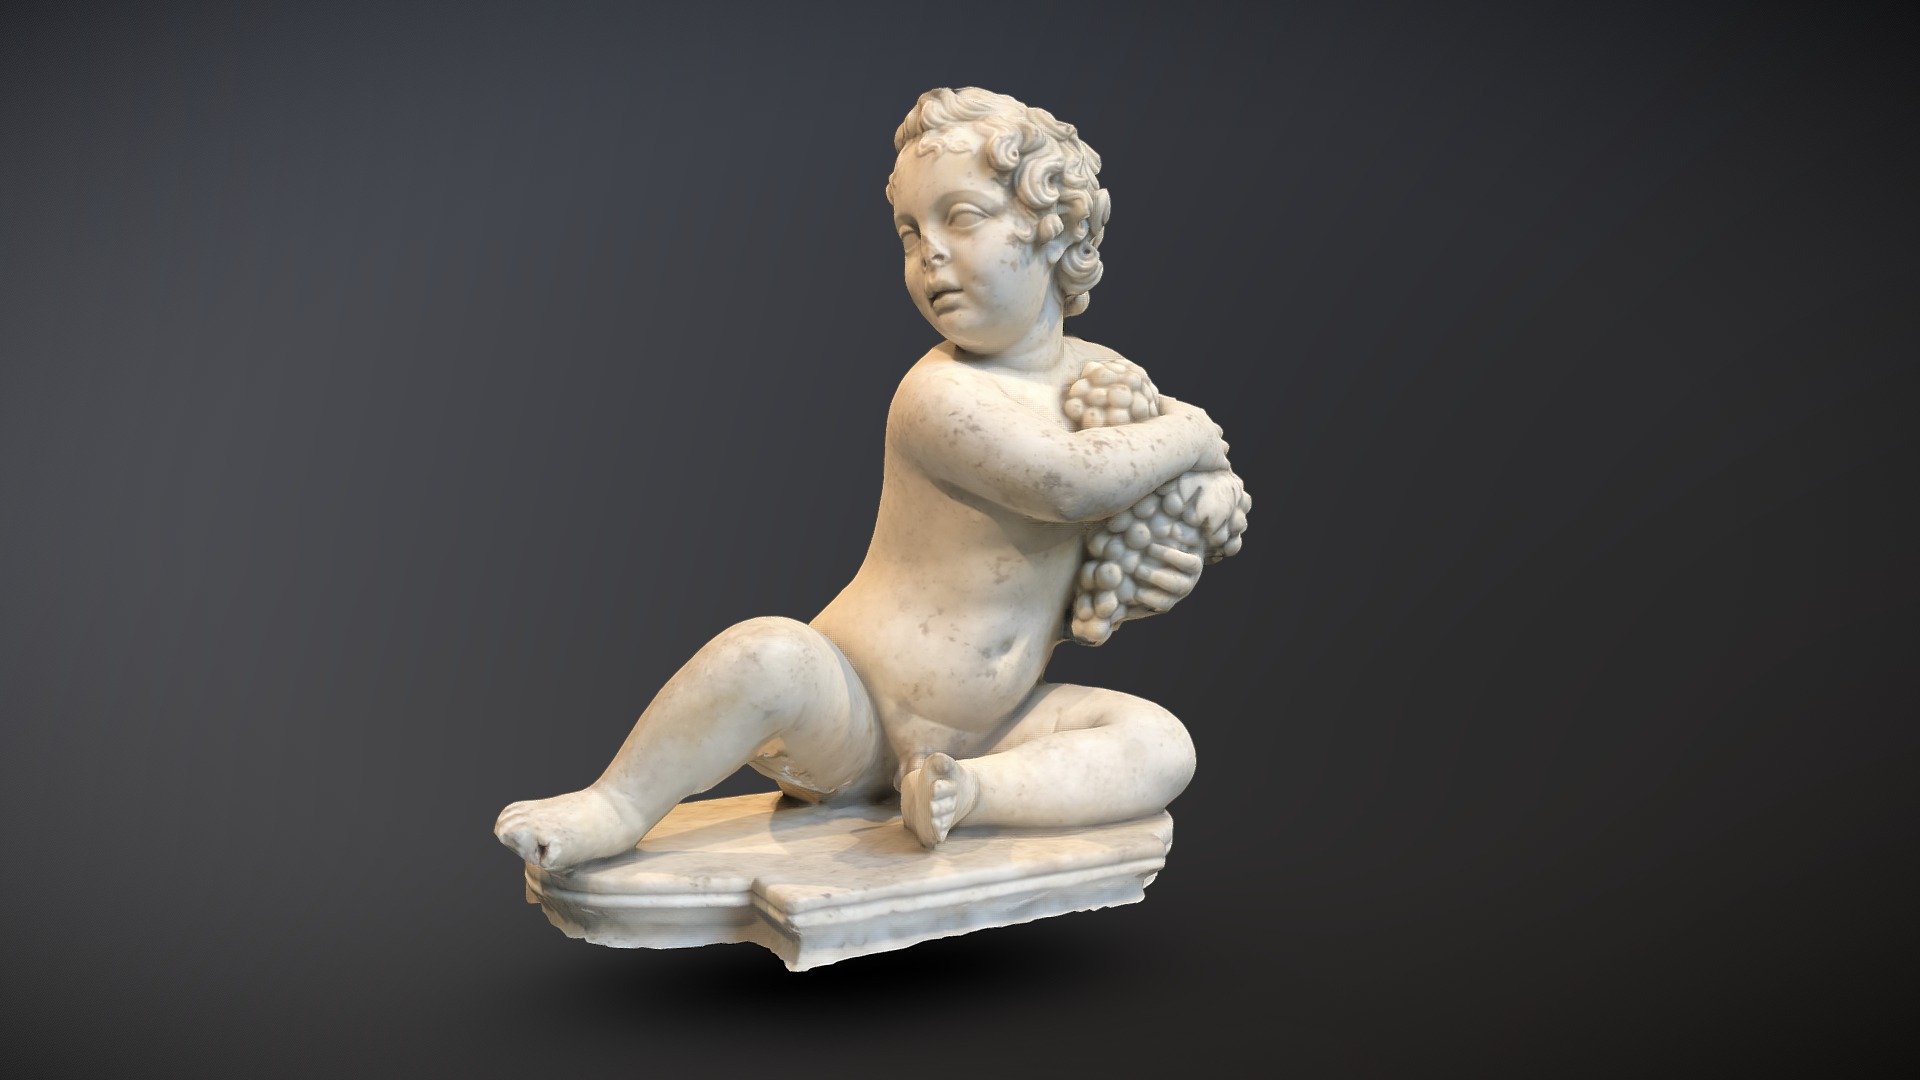 Boy with Grapes (photogrammetry scan)